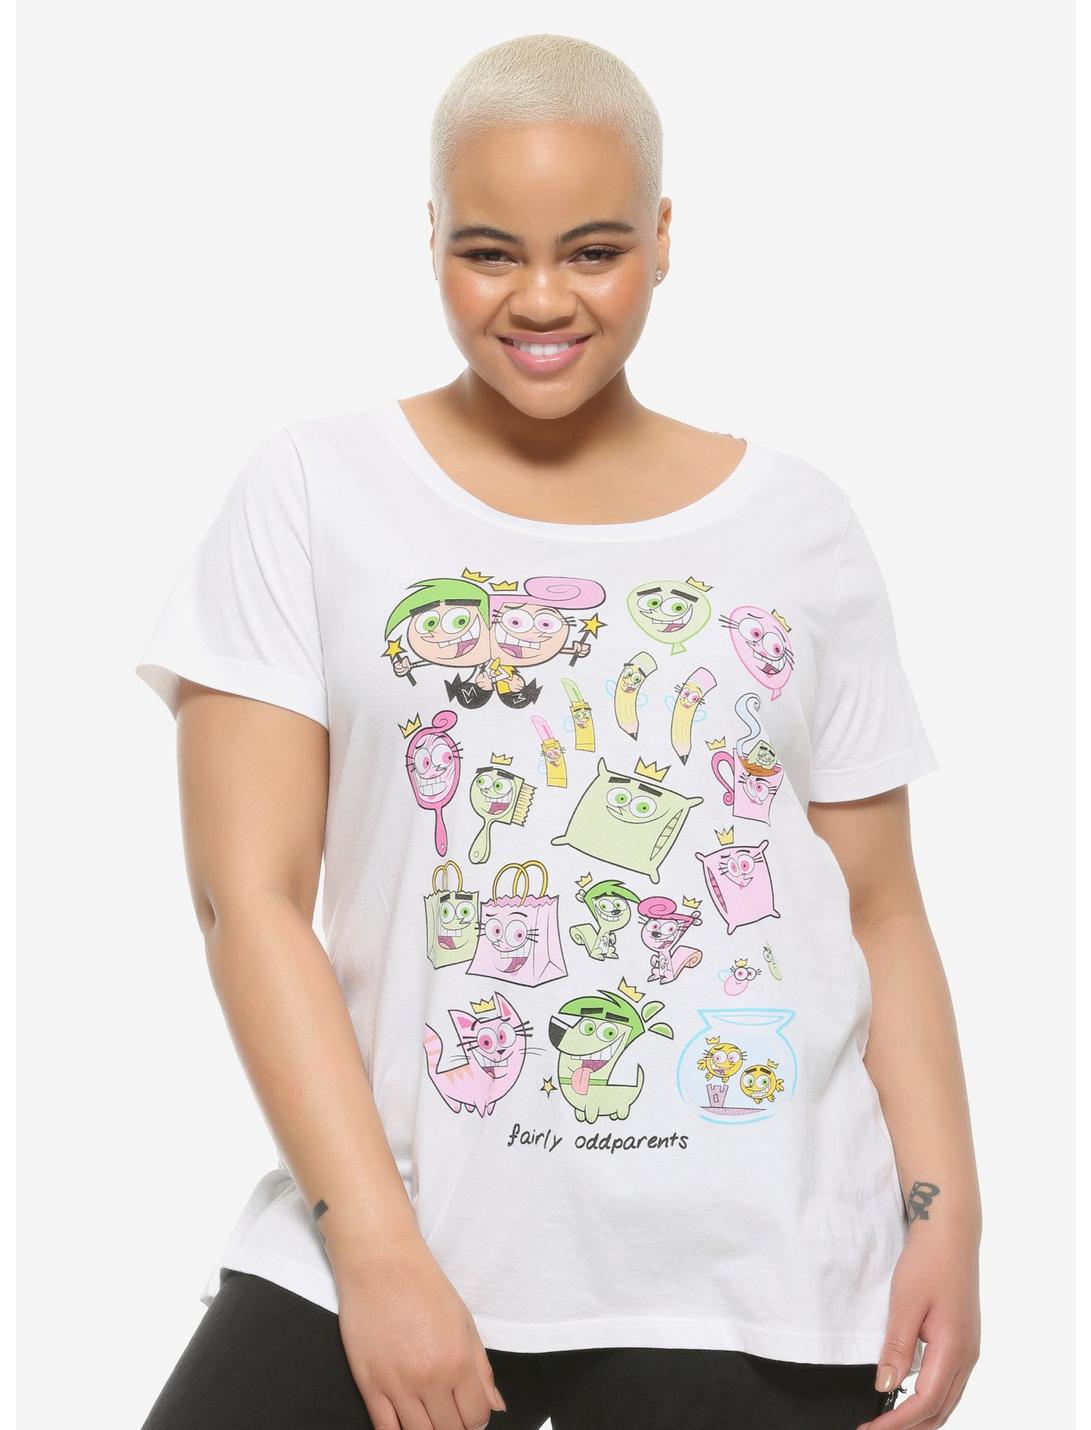 The Fairly Oddparents All Shapes & Sizes Girls T-Shirt Plus Size, MULTI, hi-res